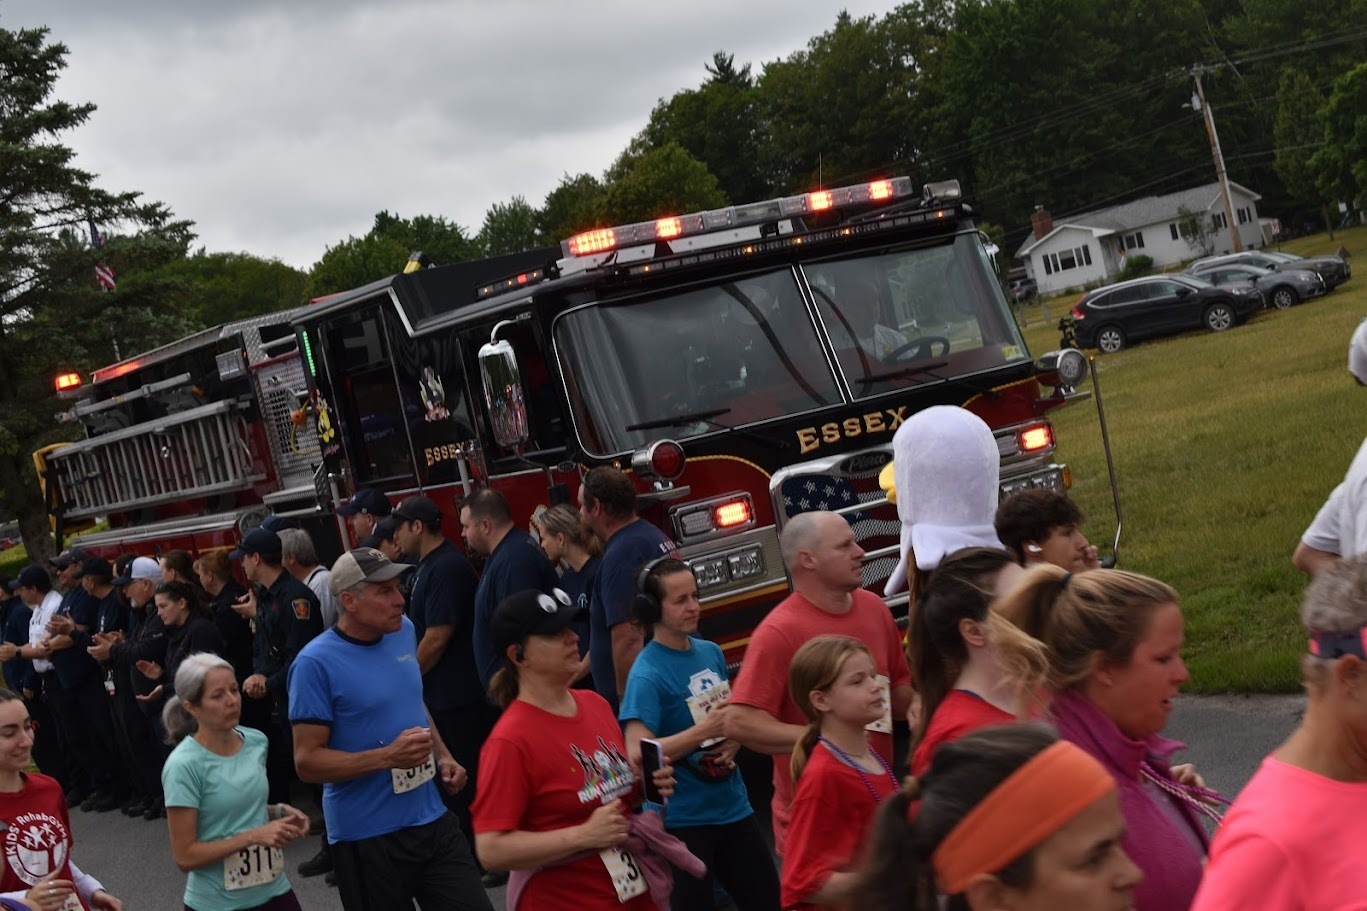 Big Beautiful Life Run Walk and Roll and Emergency Services Touch a Truck, Essex Junction, Vermont, United States